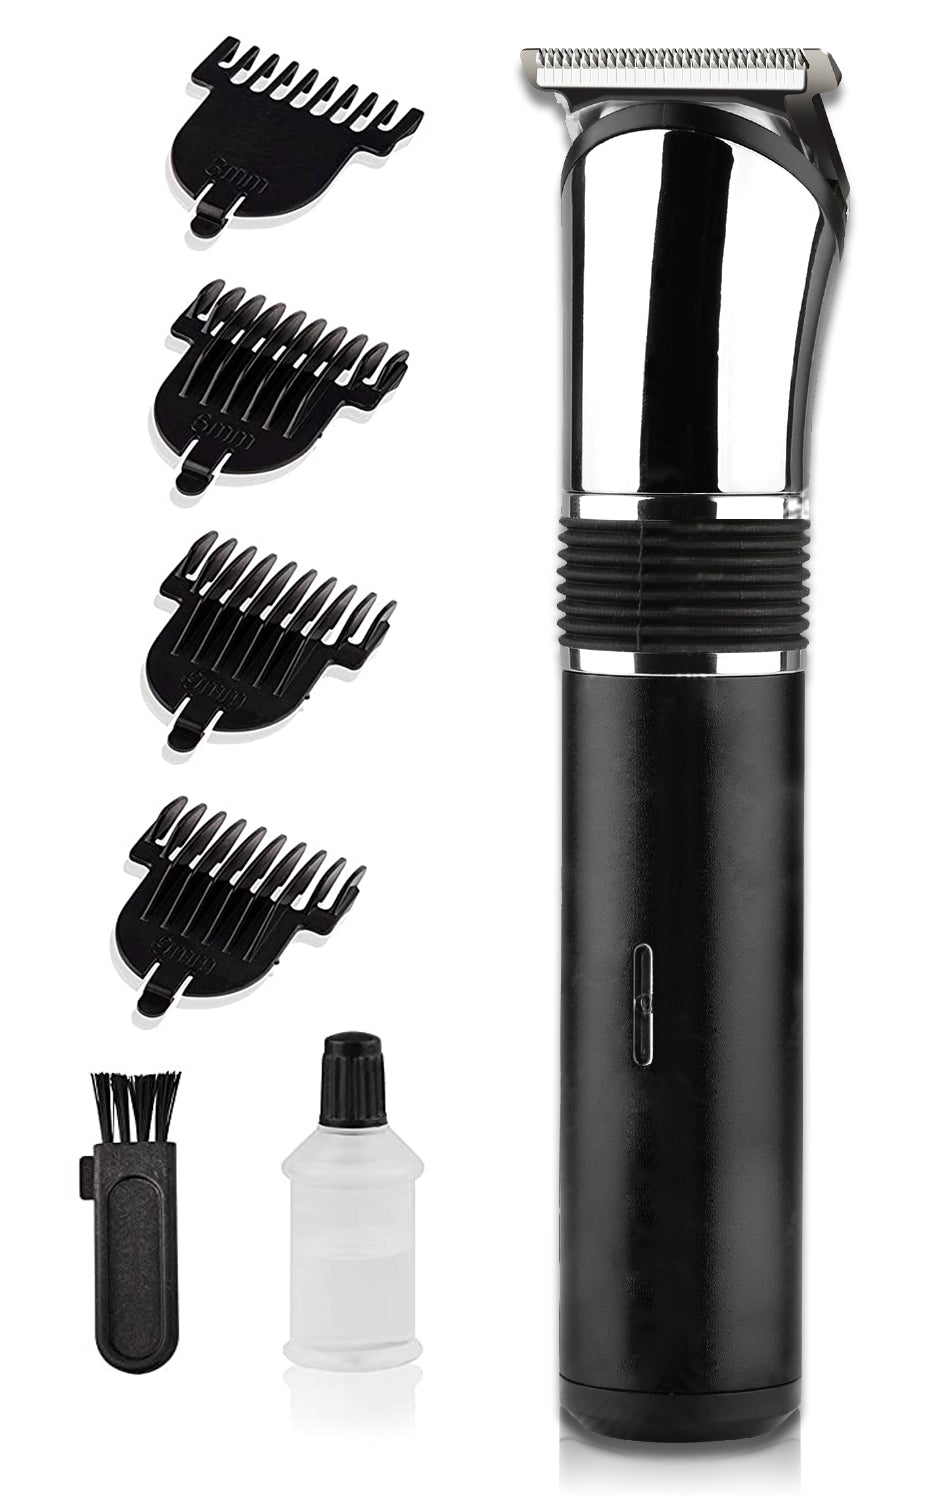 Pick Ur Needs Professional Hair Clipper Unique Switching Mode Rechargeable With Durable Battery Runtime: 90 min Trimmer for Men